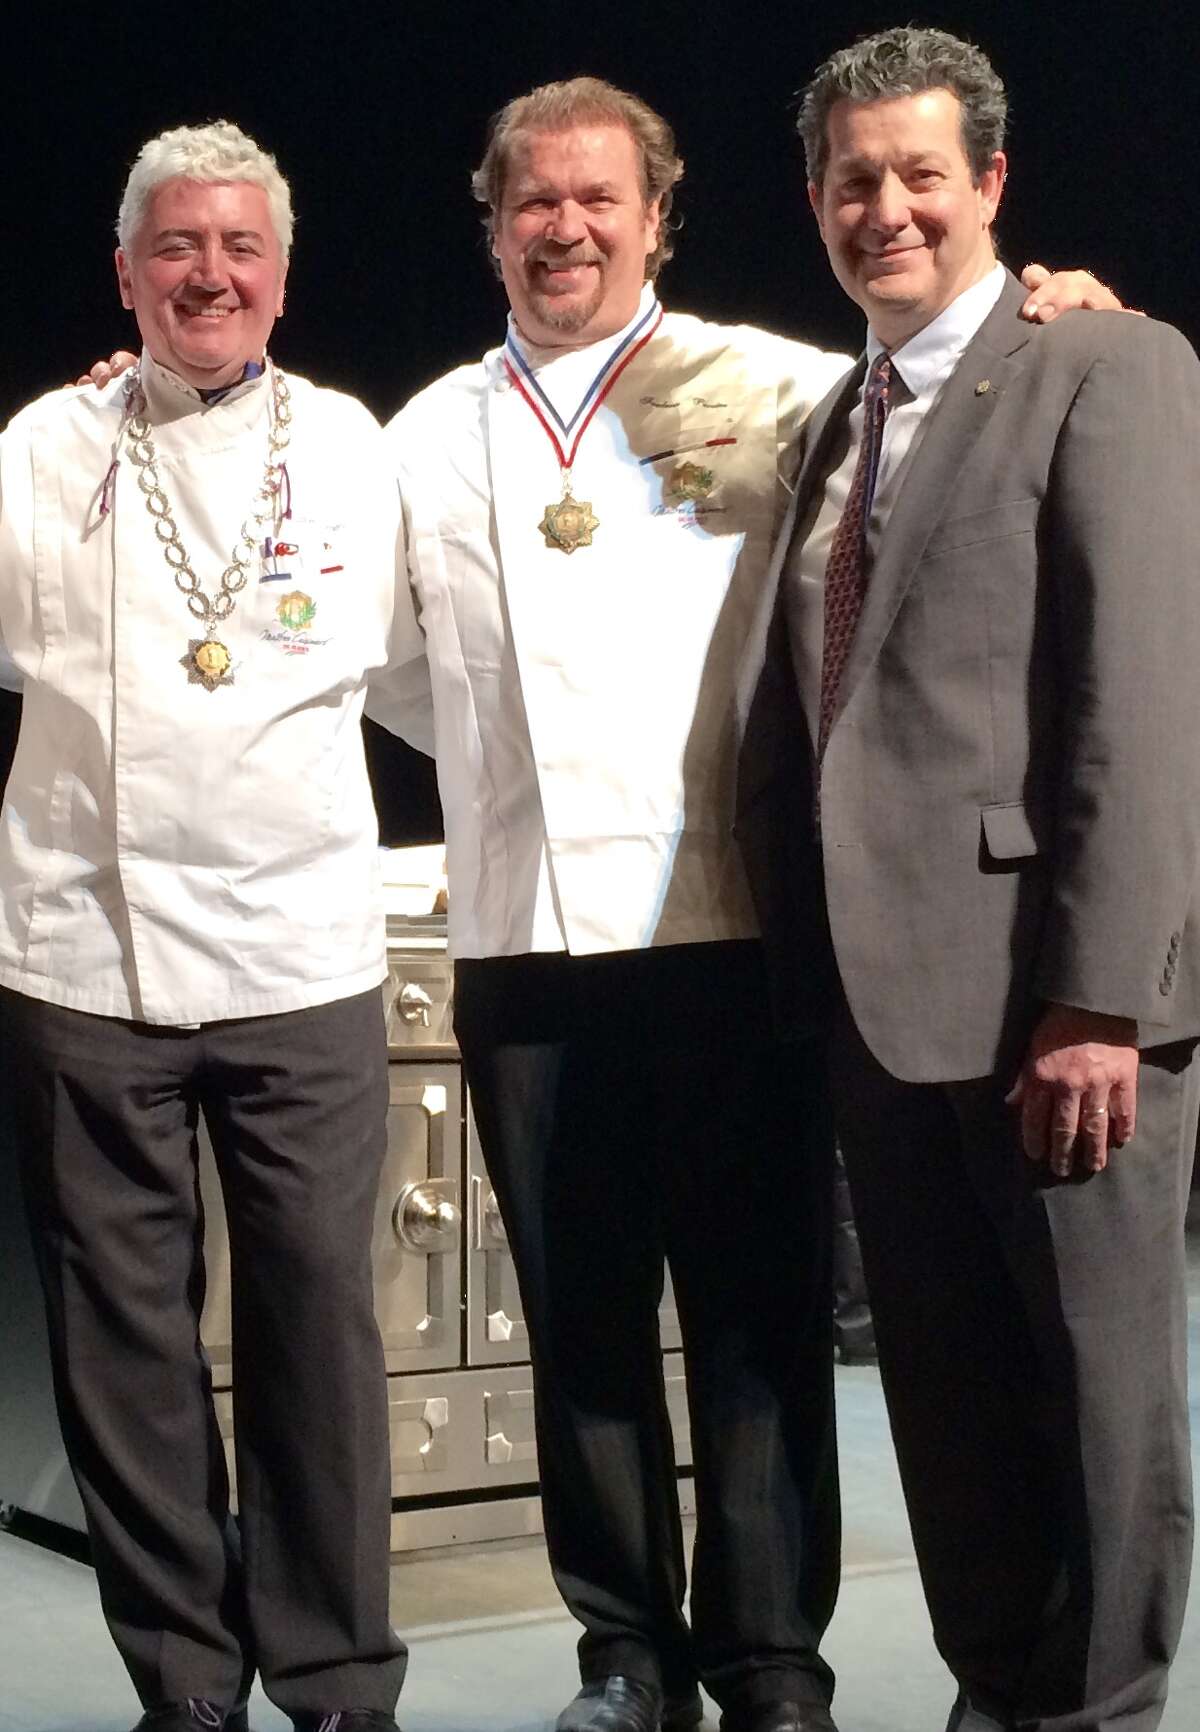 Master chefs of France Jean-Louis Dumonet, left, Frederic Perrier and Gérard Bertholon at Biarritz, France.